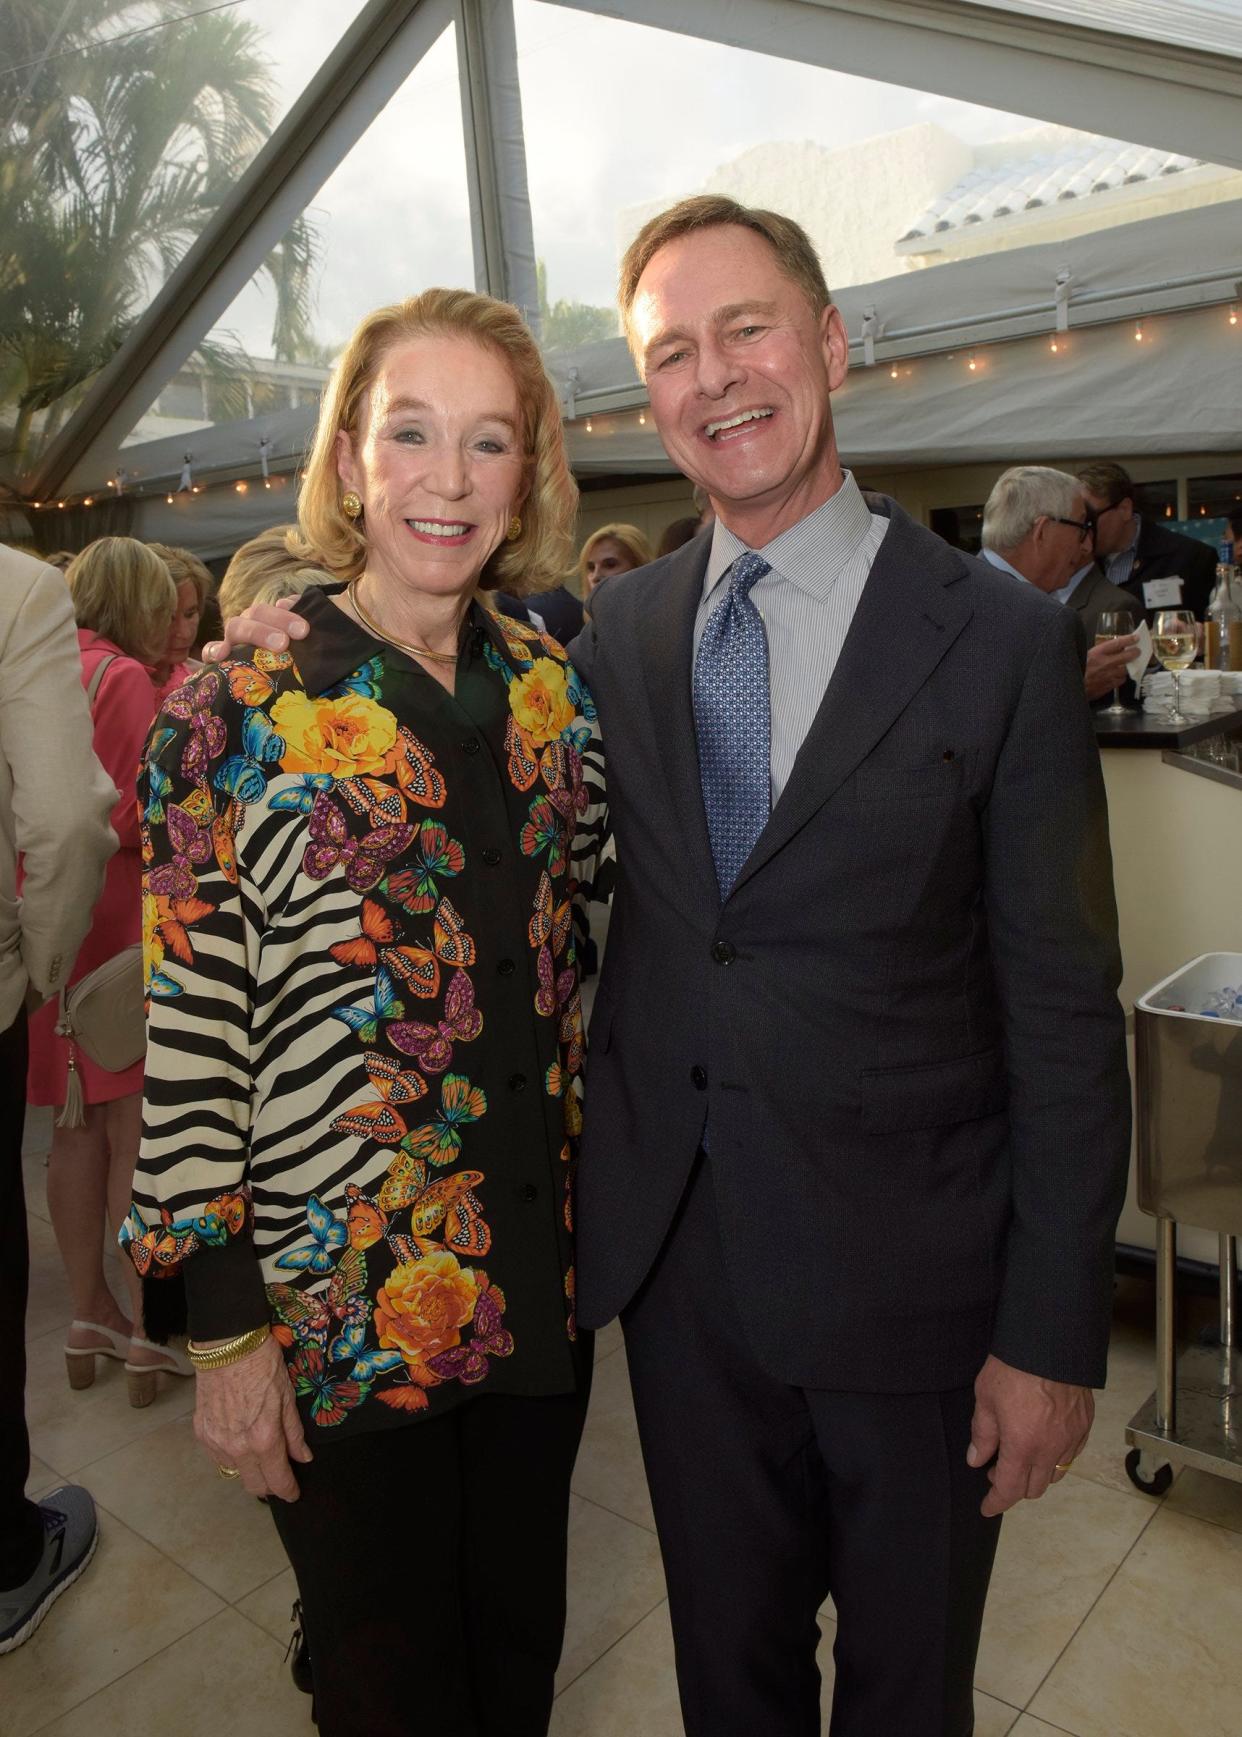 K.K. Sullivan and Larry Hatch at a benefit for UH Rainbow Babies & Children's Hospital in March 2019. The Circle of Friends evening for the hospital is set for March 10 at Club Colette.